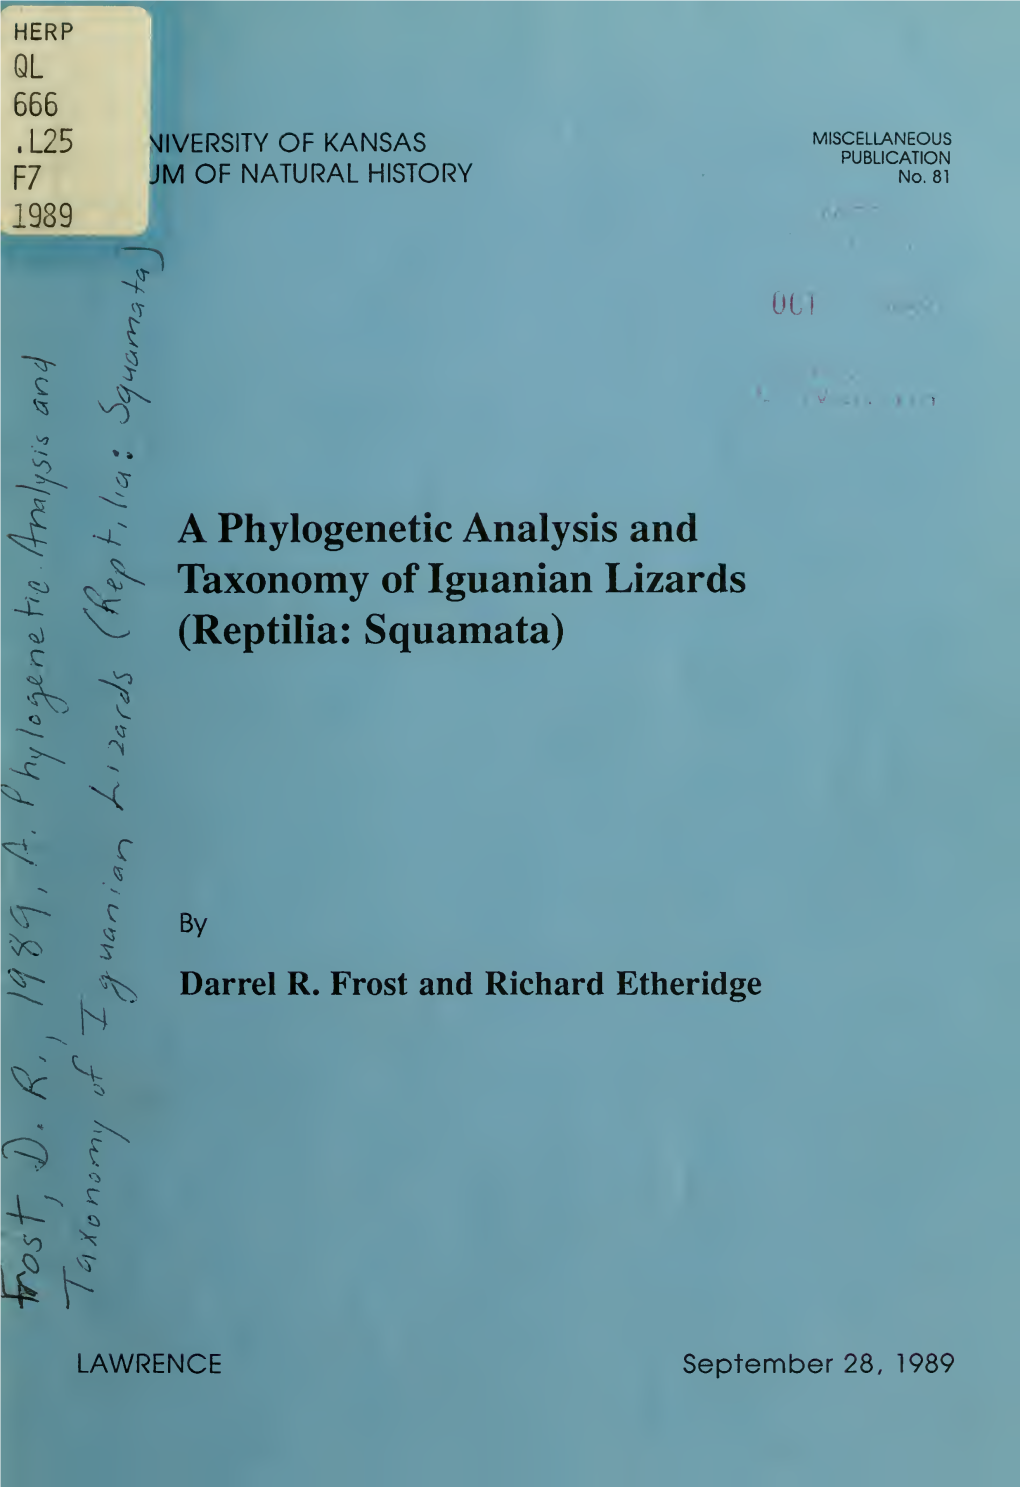 A Phylogenetic Analysis and Taxonomy of Iguanian Lizards (Reptilia, Squamata)